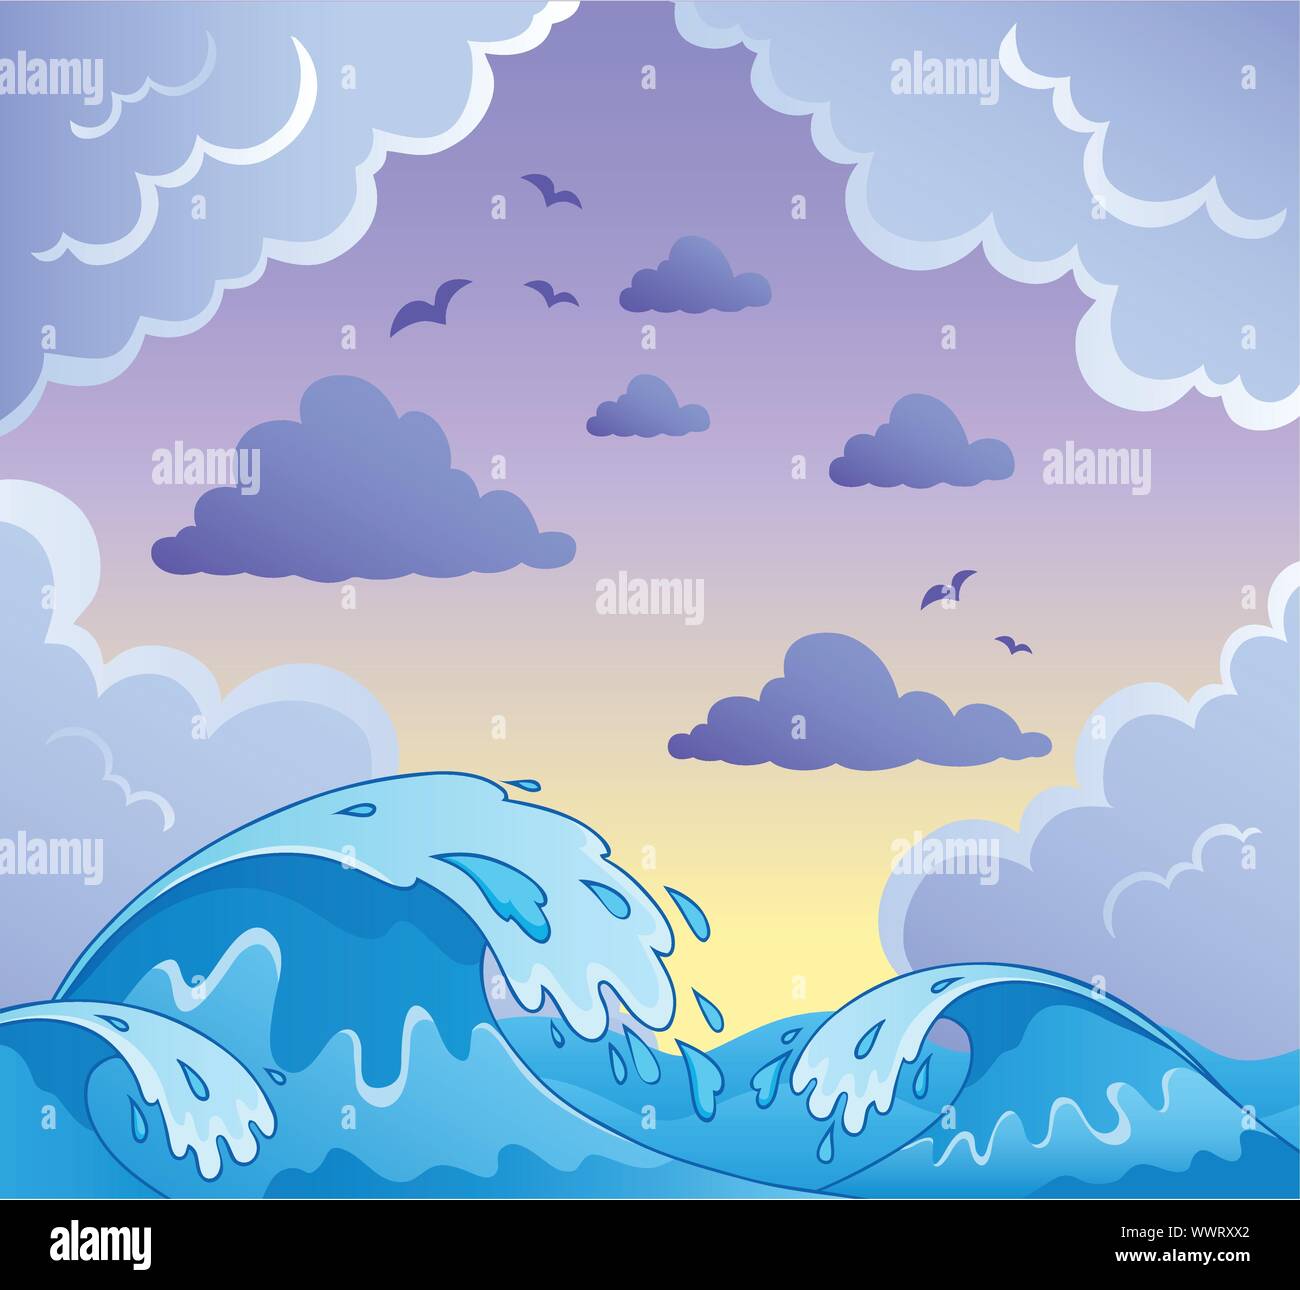 Waves theme image 2 Stock Vector